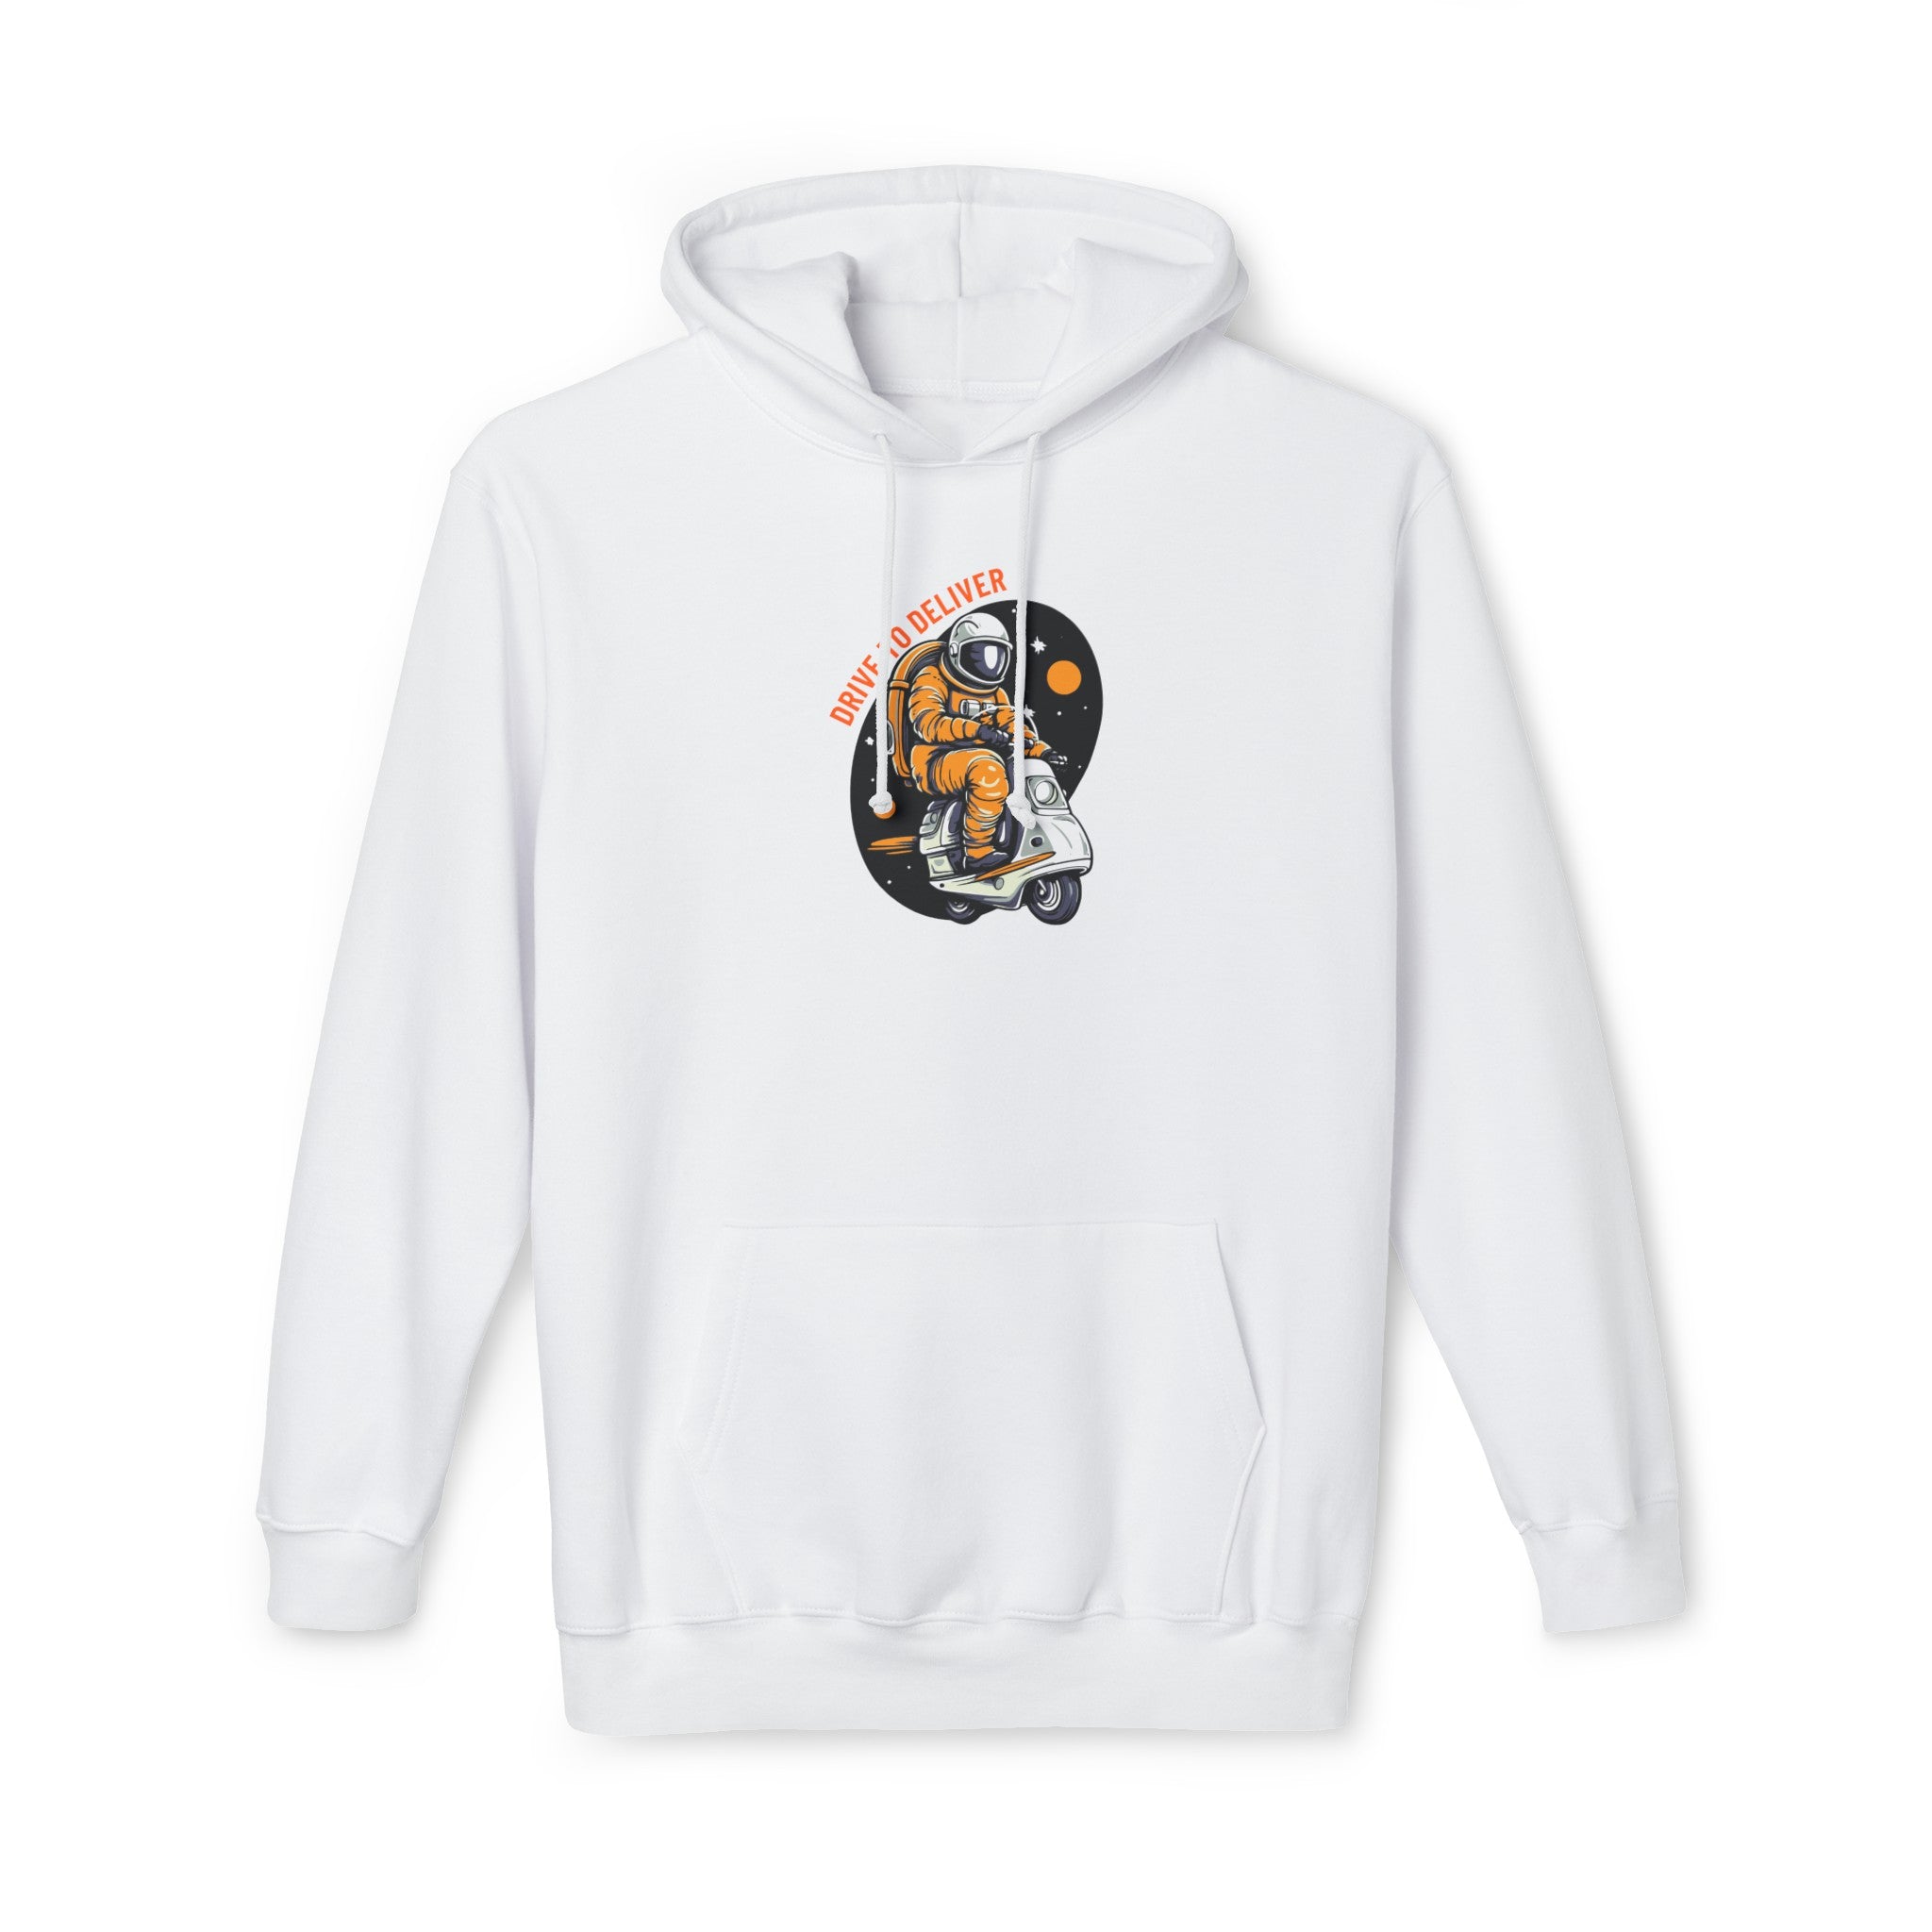 Drive To Deliver - Unisex Hooded Sweatshirt, Made in US